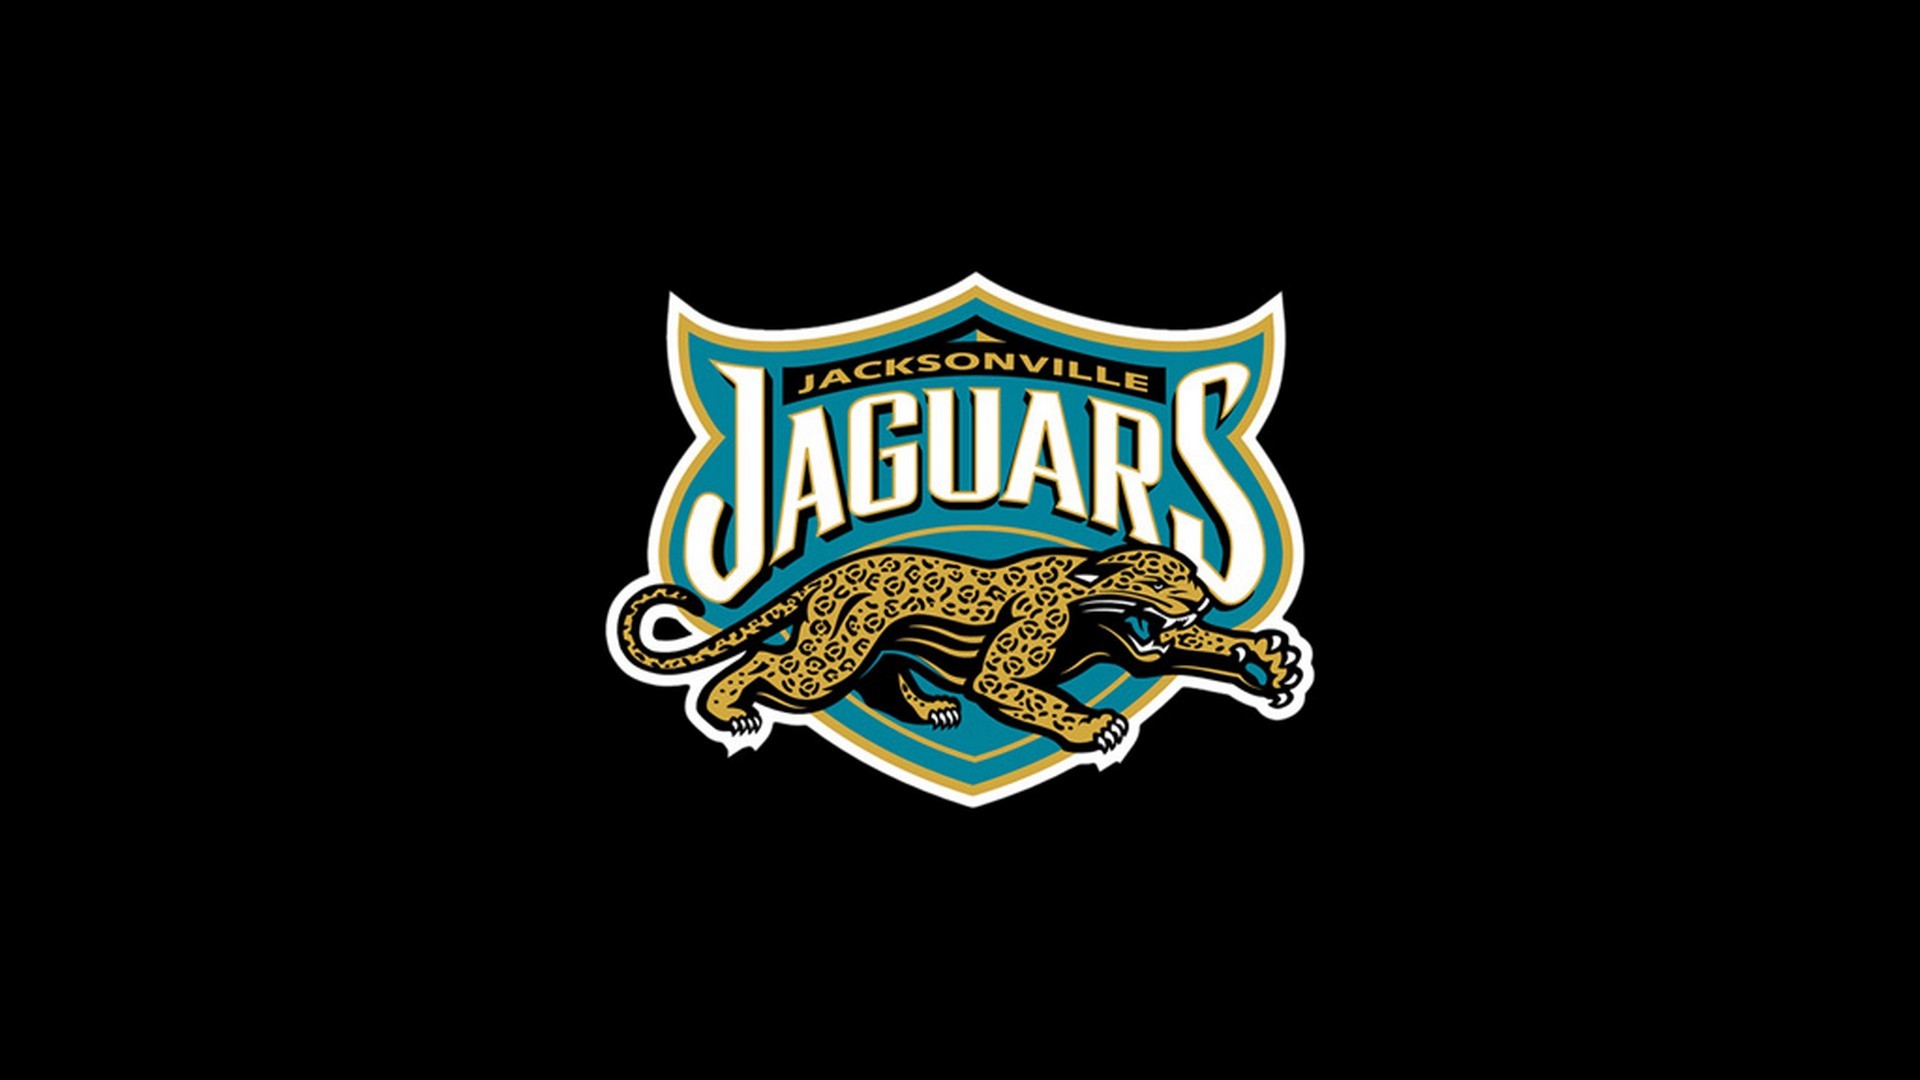 1920x1080 Wallpapers HD Jacksonville Jaguars with resolution  pixel. You can  make this wallpaper for your